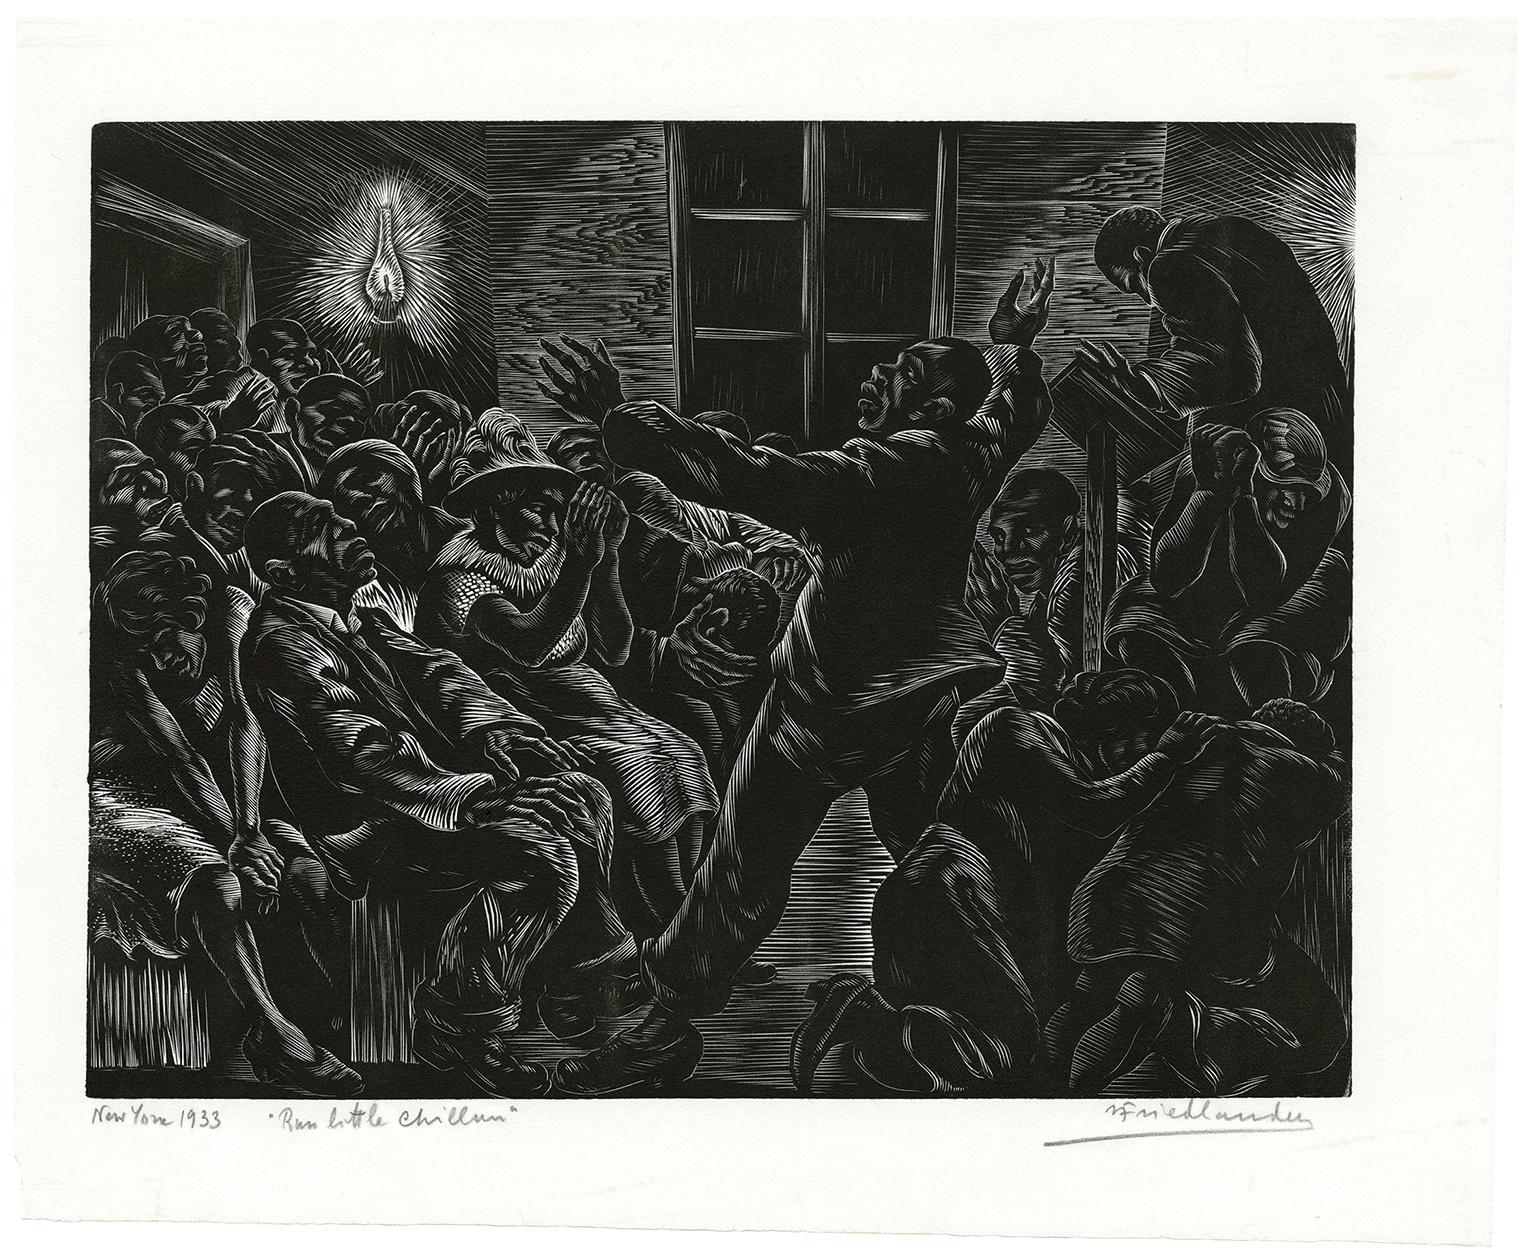 'Run Little Chillun' also 'Revival' — African American Subject - Print by Isac Friedlander